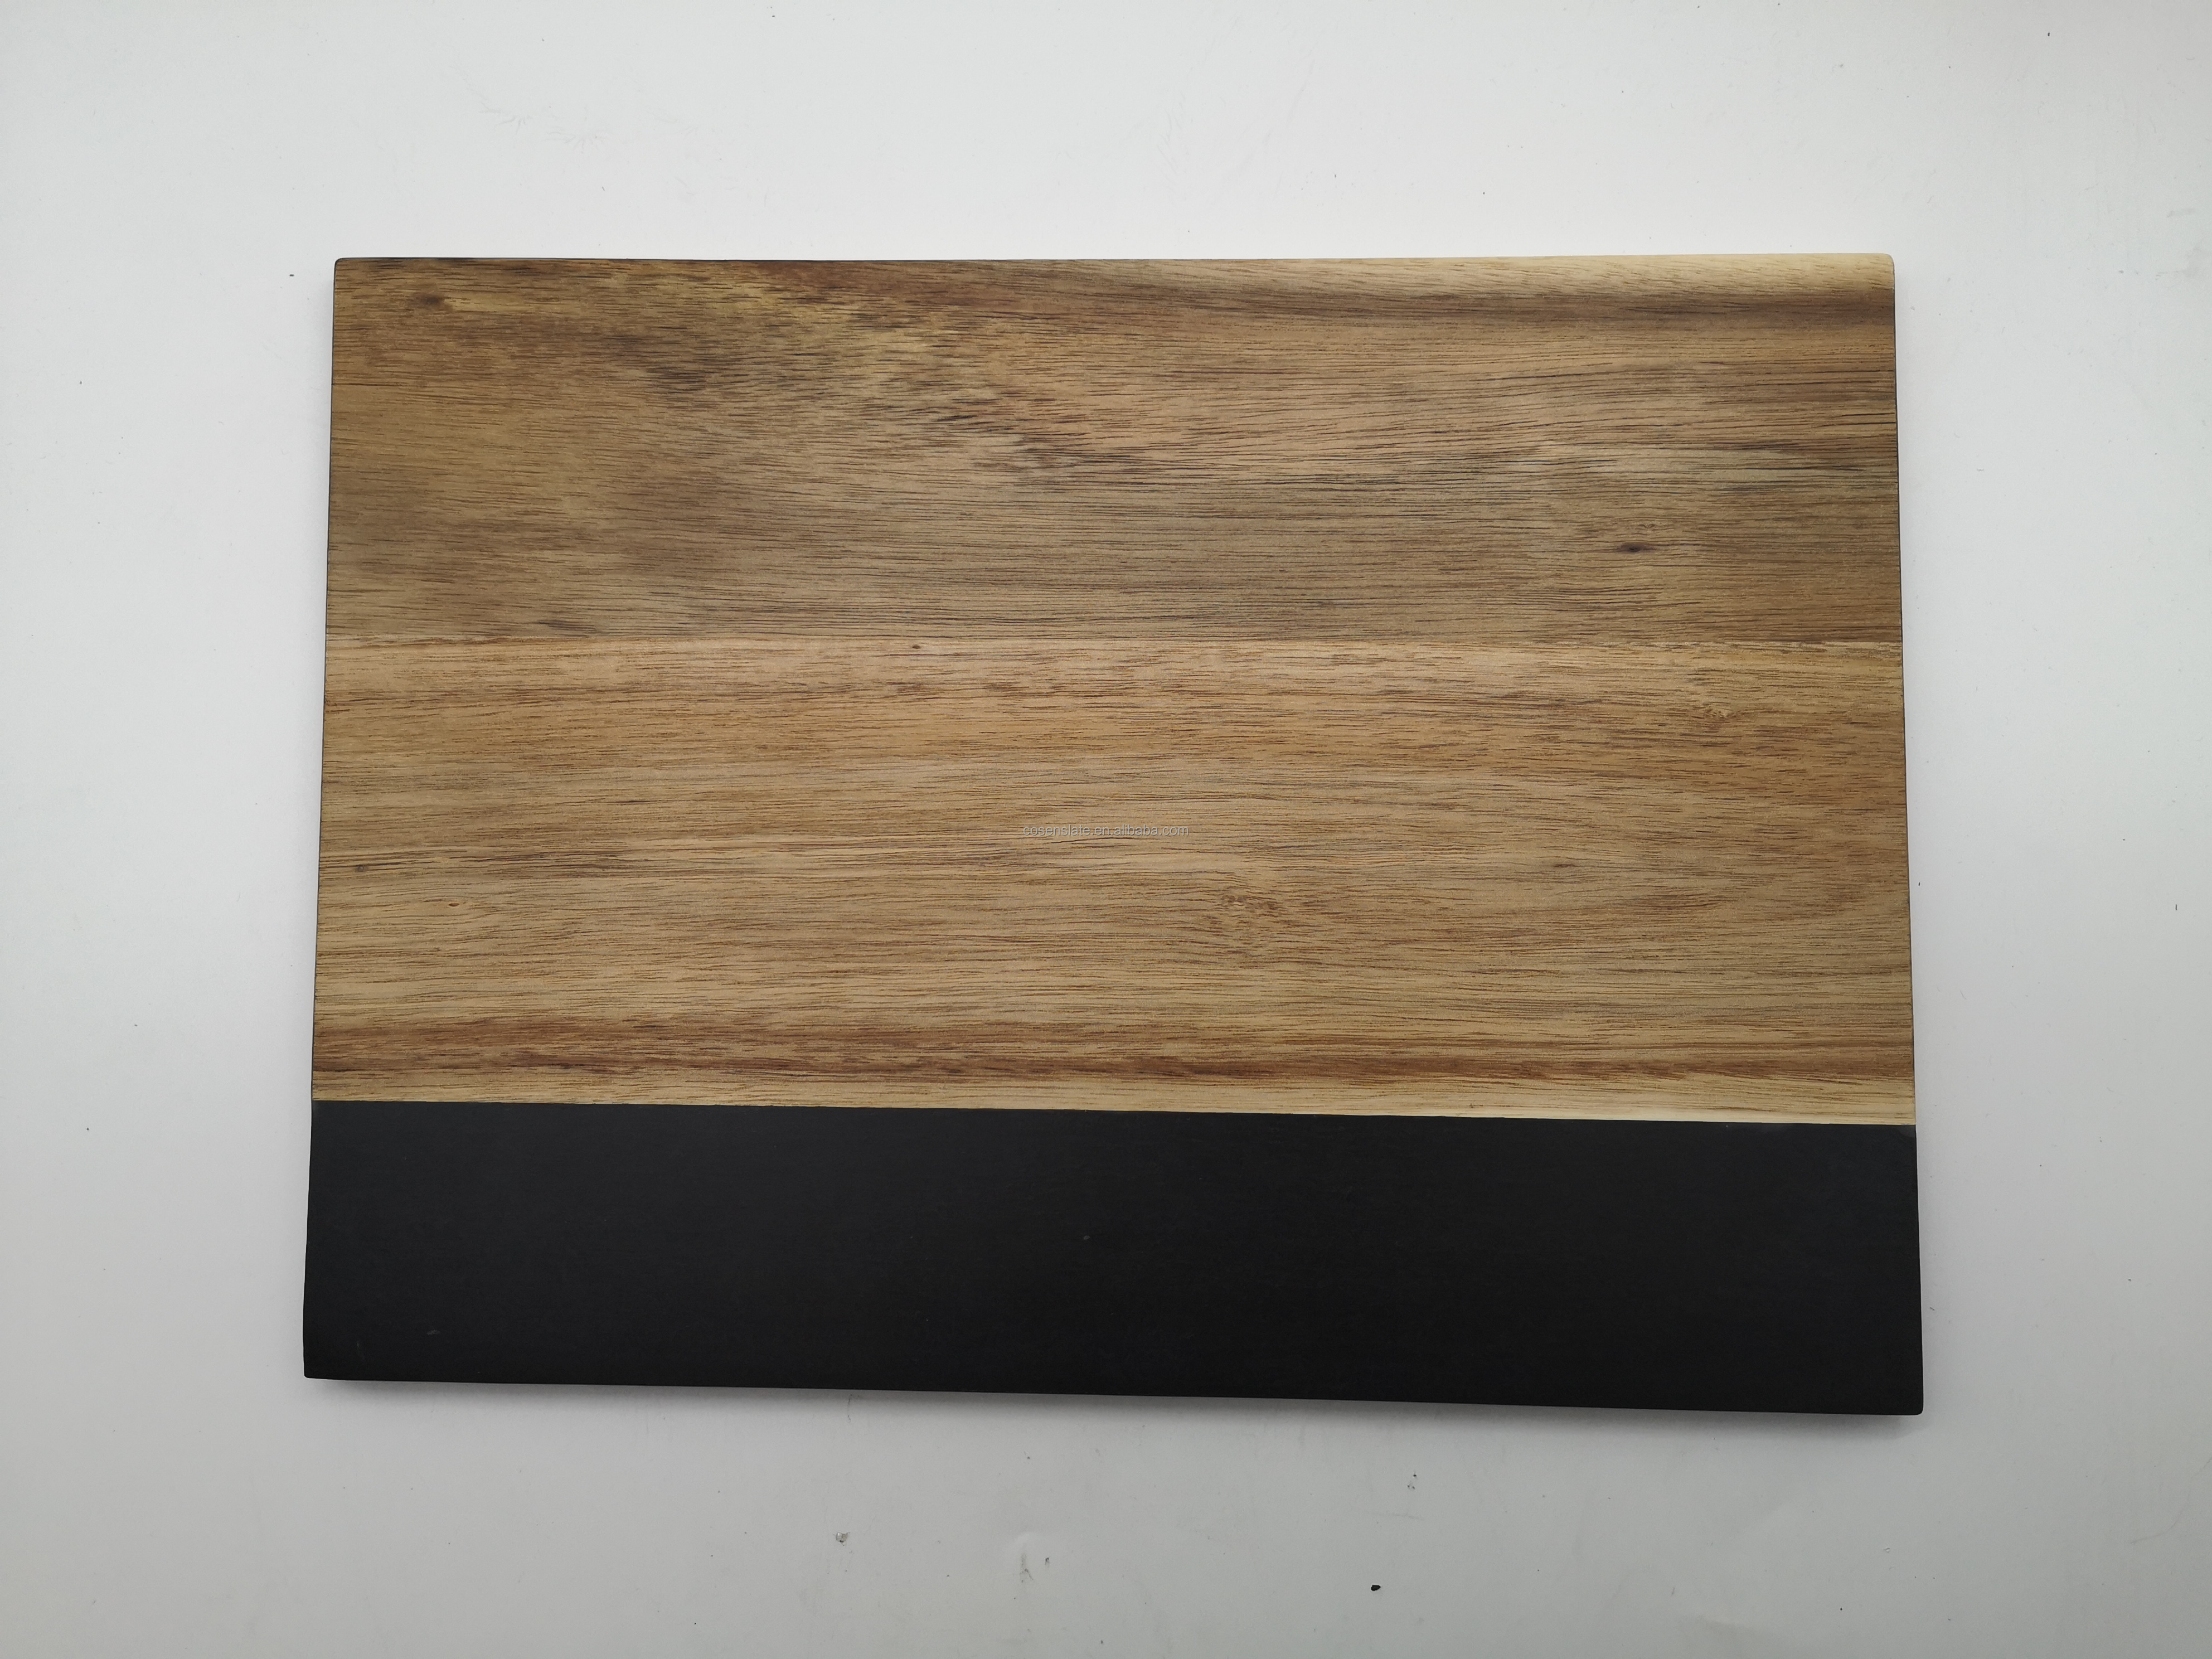 Custom Size China Tableware Wooden Serving Board with Natural Slate